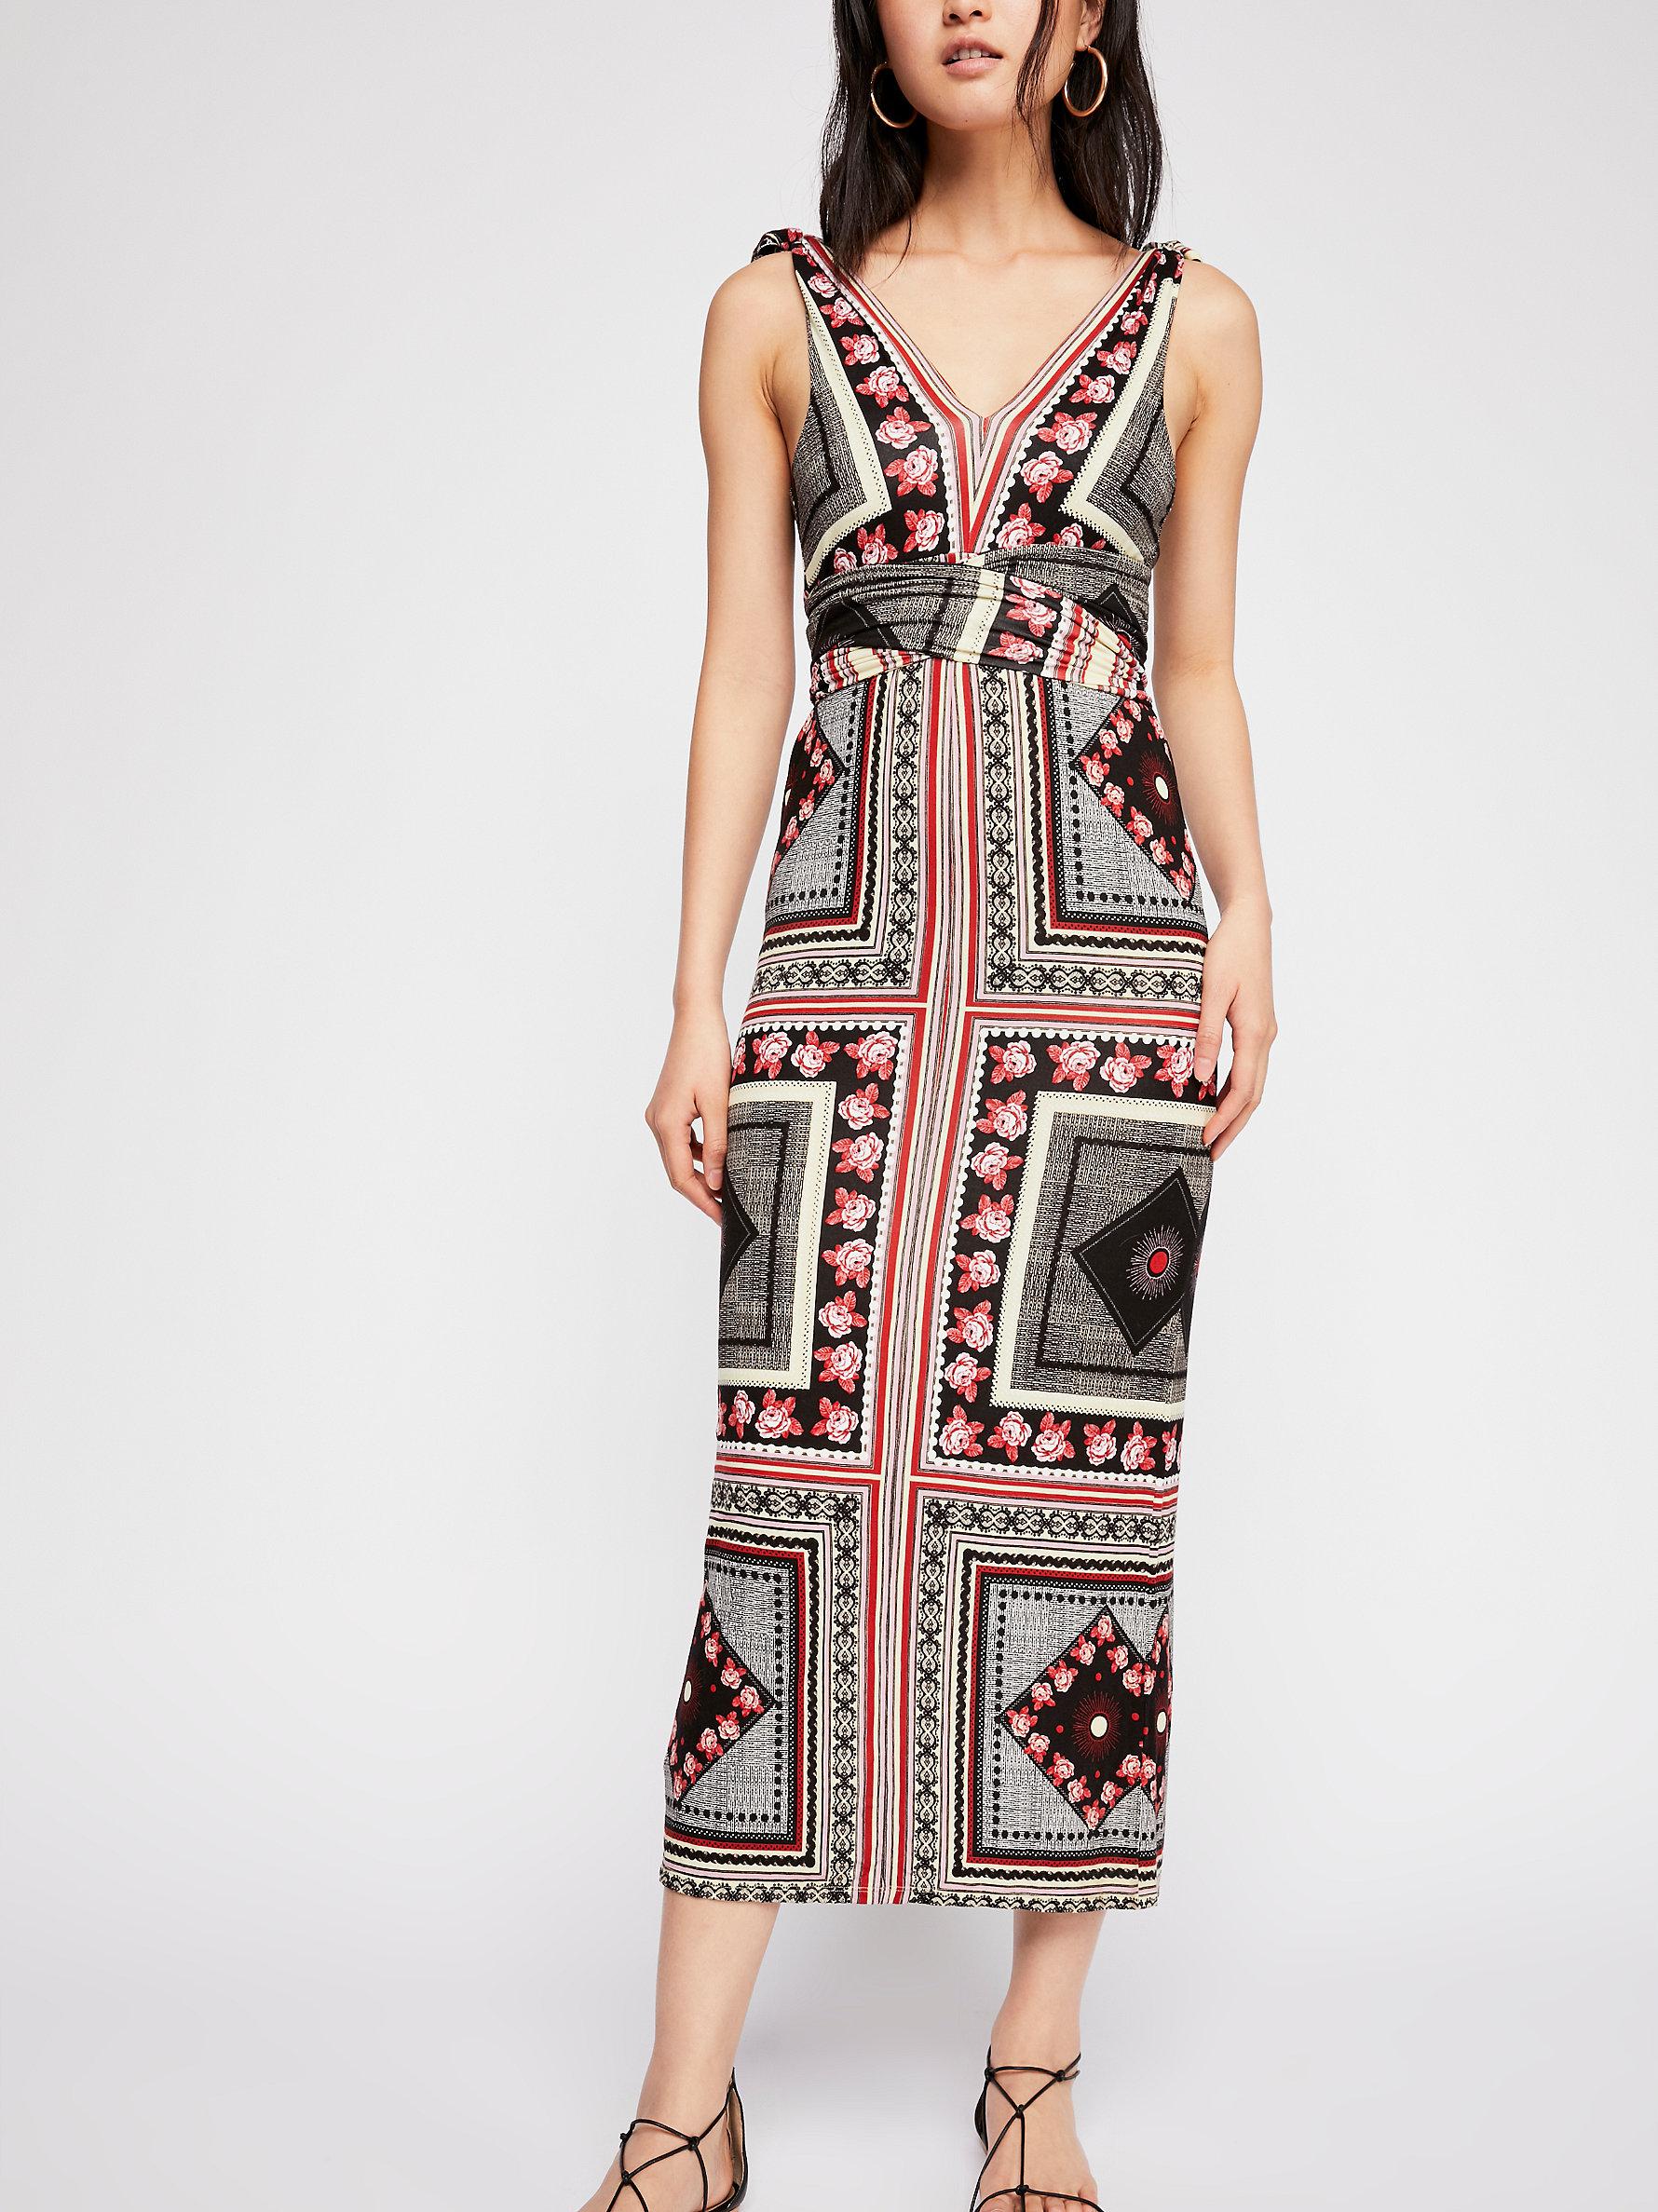 All In Favor Knit Maxi Dress Hotsell, 51% OFF | lagence.tv